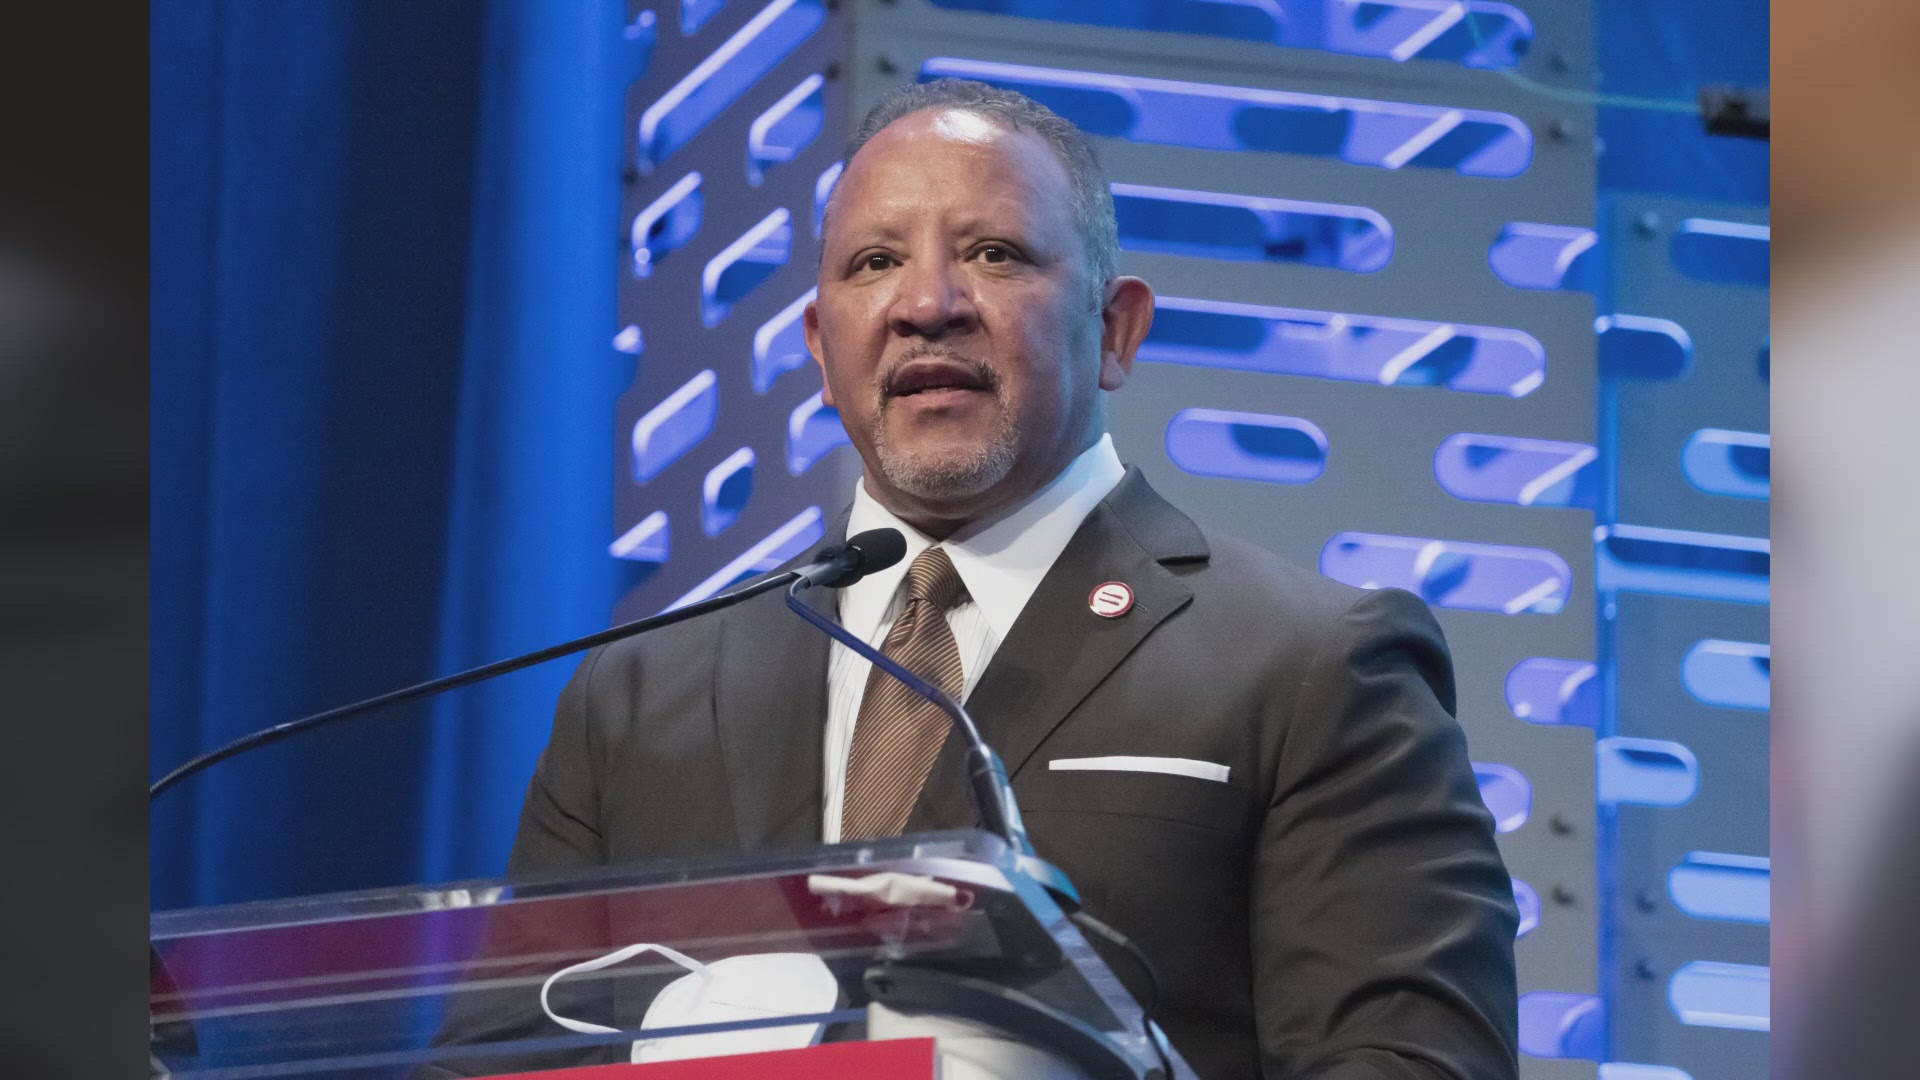 Delgado says Morial was recognized as one of the 100 most influential black Americans by Ebony magazine.